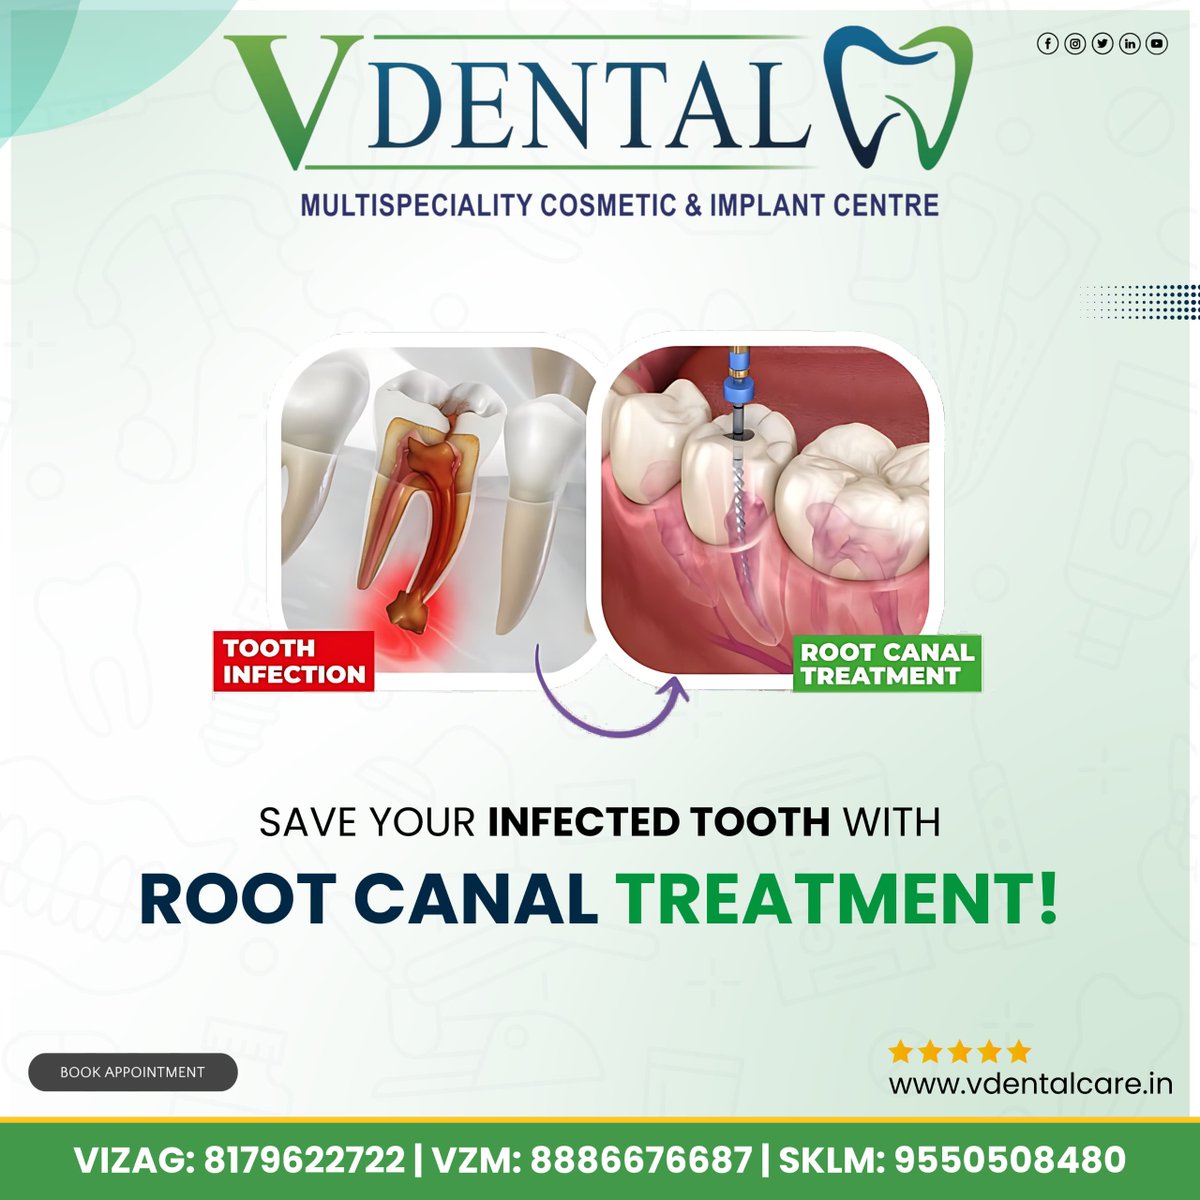 🦷 TOOTH INFECTION? 🦷

🔧 ROOT CANAL TREATMENT 🔧

✨ SAVE YOUR INFECTED TOOTH WITH ROOT CANAL TREATMENT!✨

📅 BOOK YOUR APPOINTMENT NOW!

🌐 Visit: vdentalcare.in
📍 Locations & Contact Numbers:

VIZAG: 8179622722
VZM: 8886676687
SKLM: 9550508480

#RootCanalTreatment